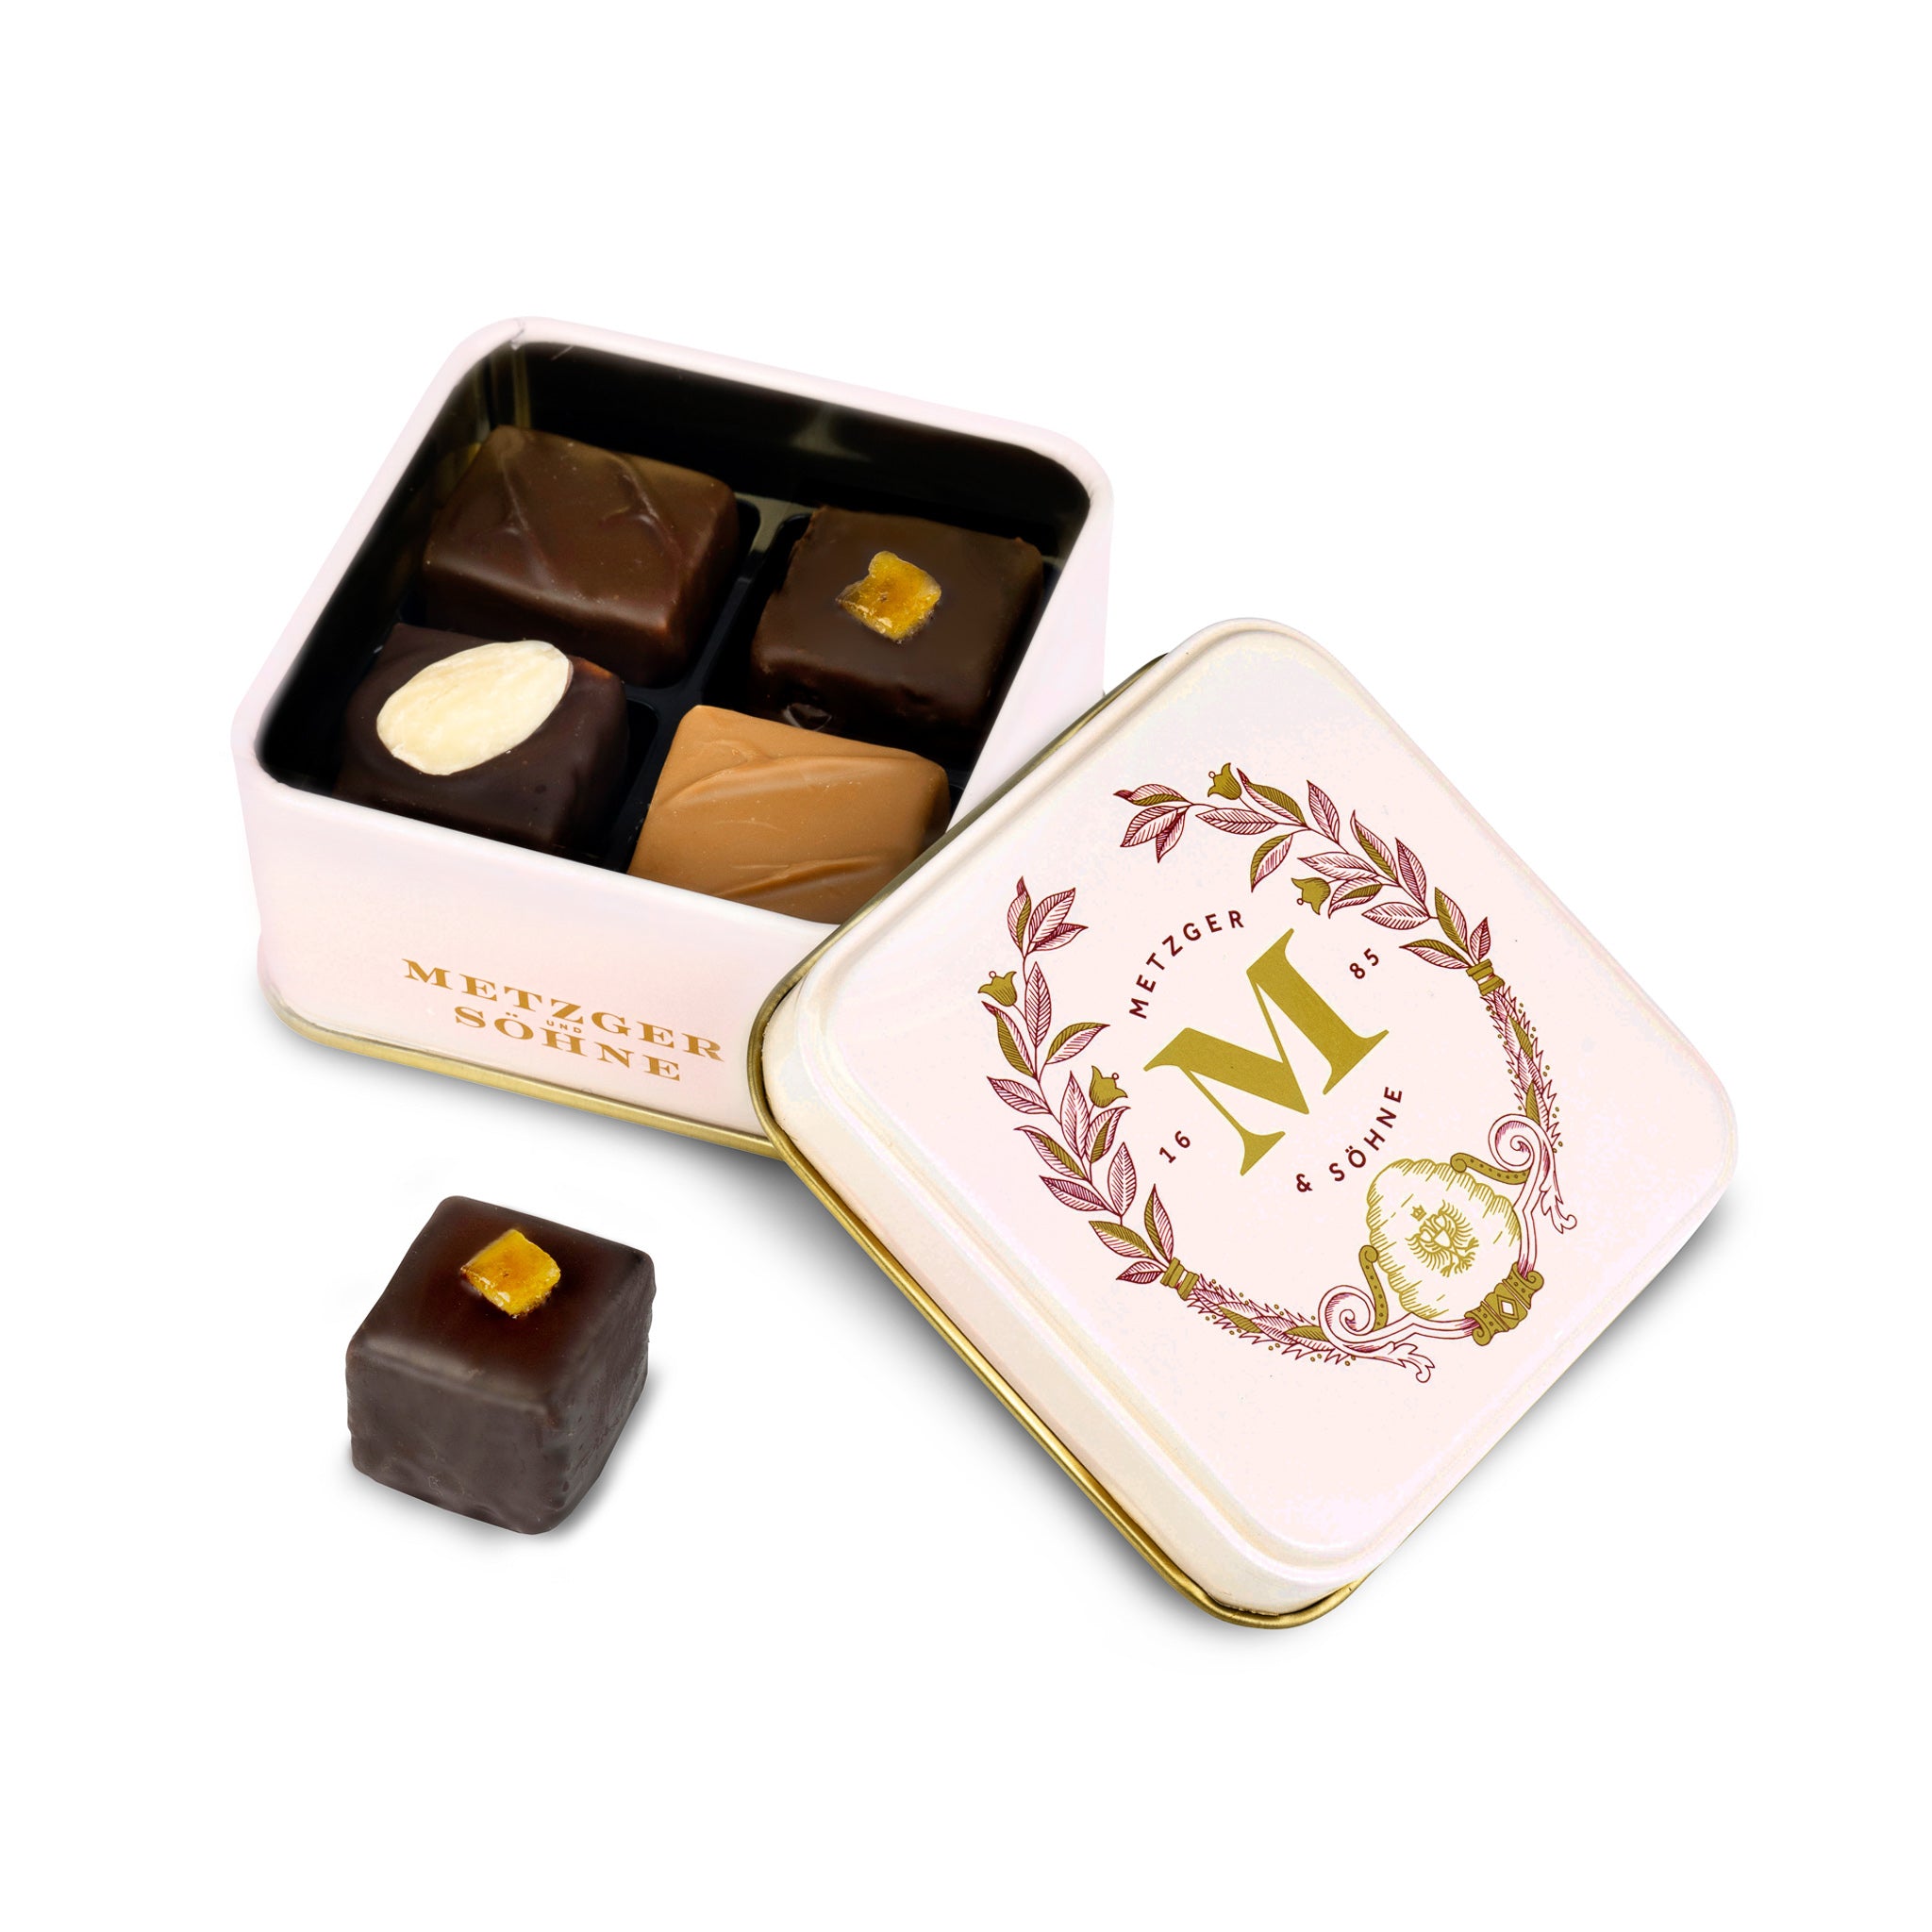 Petit Metzger signature tin in pastel pink filled with 4 different Lebkuchen 'honey cake' pralines.